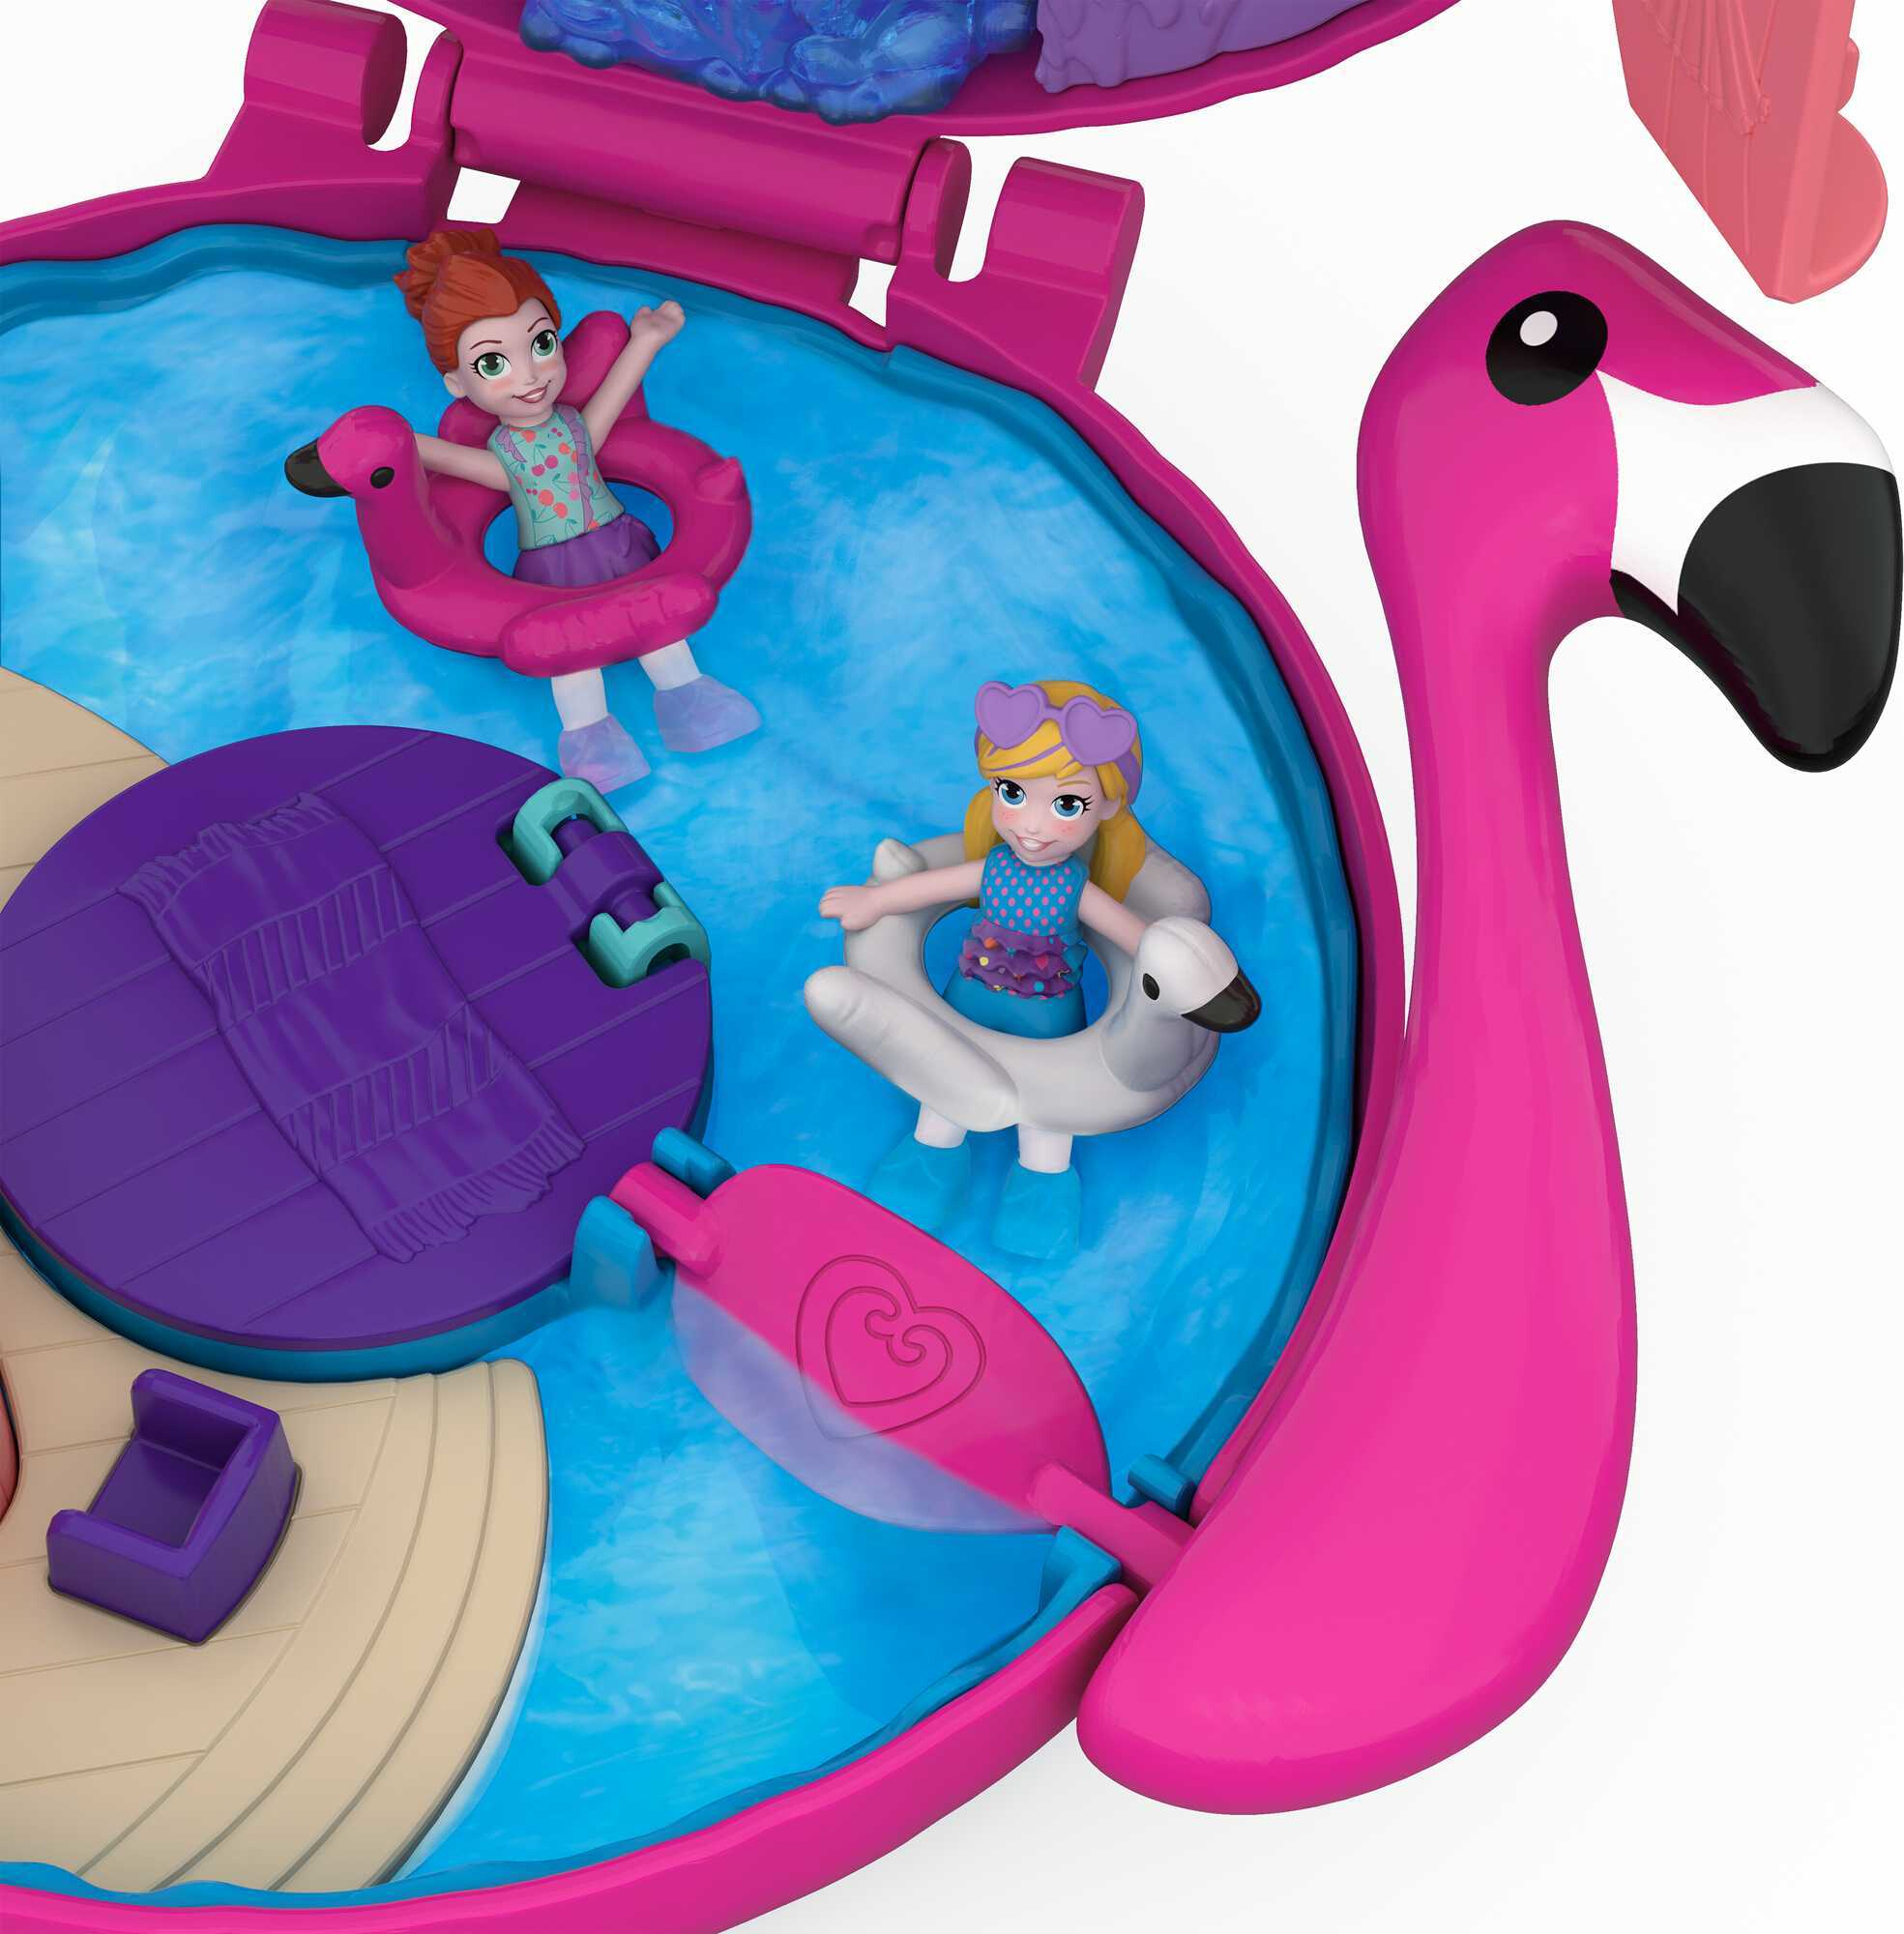 Polly Pocket Mini Toys, Compact Playset and 2 Dolls, Flamingo Floatie - image 5 of 8